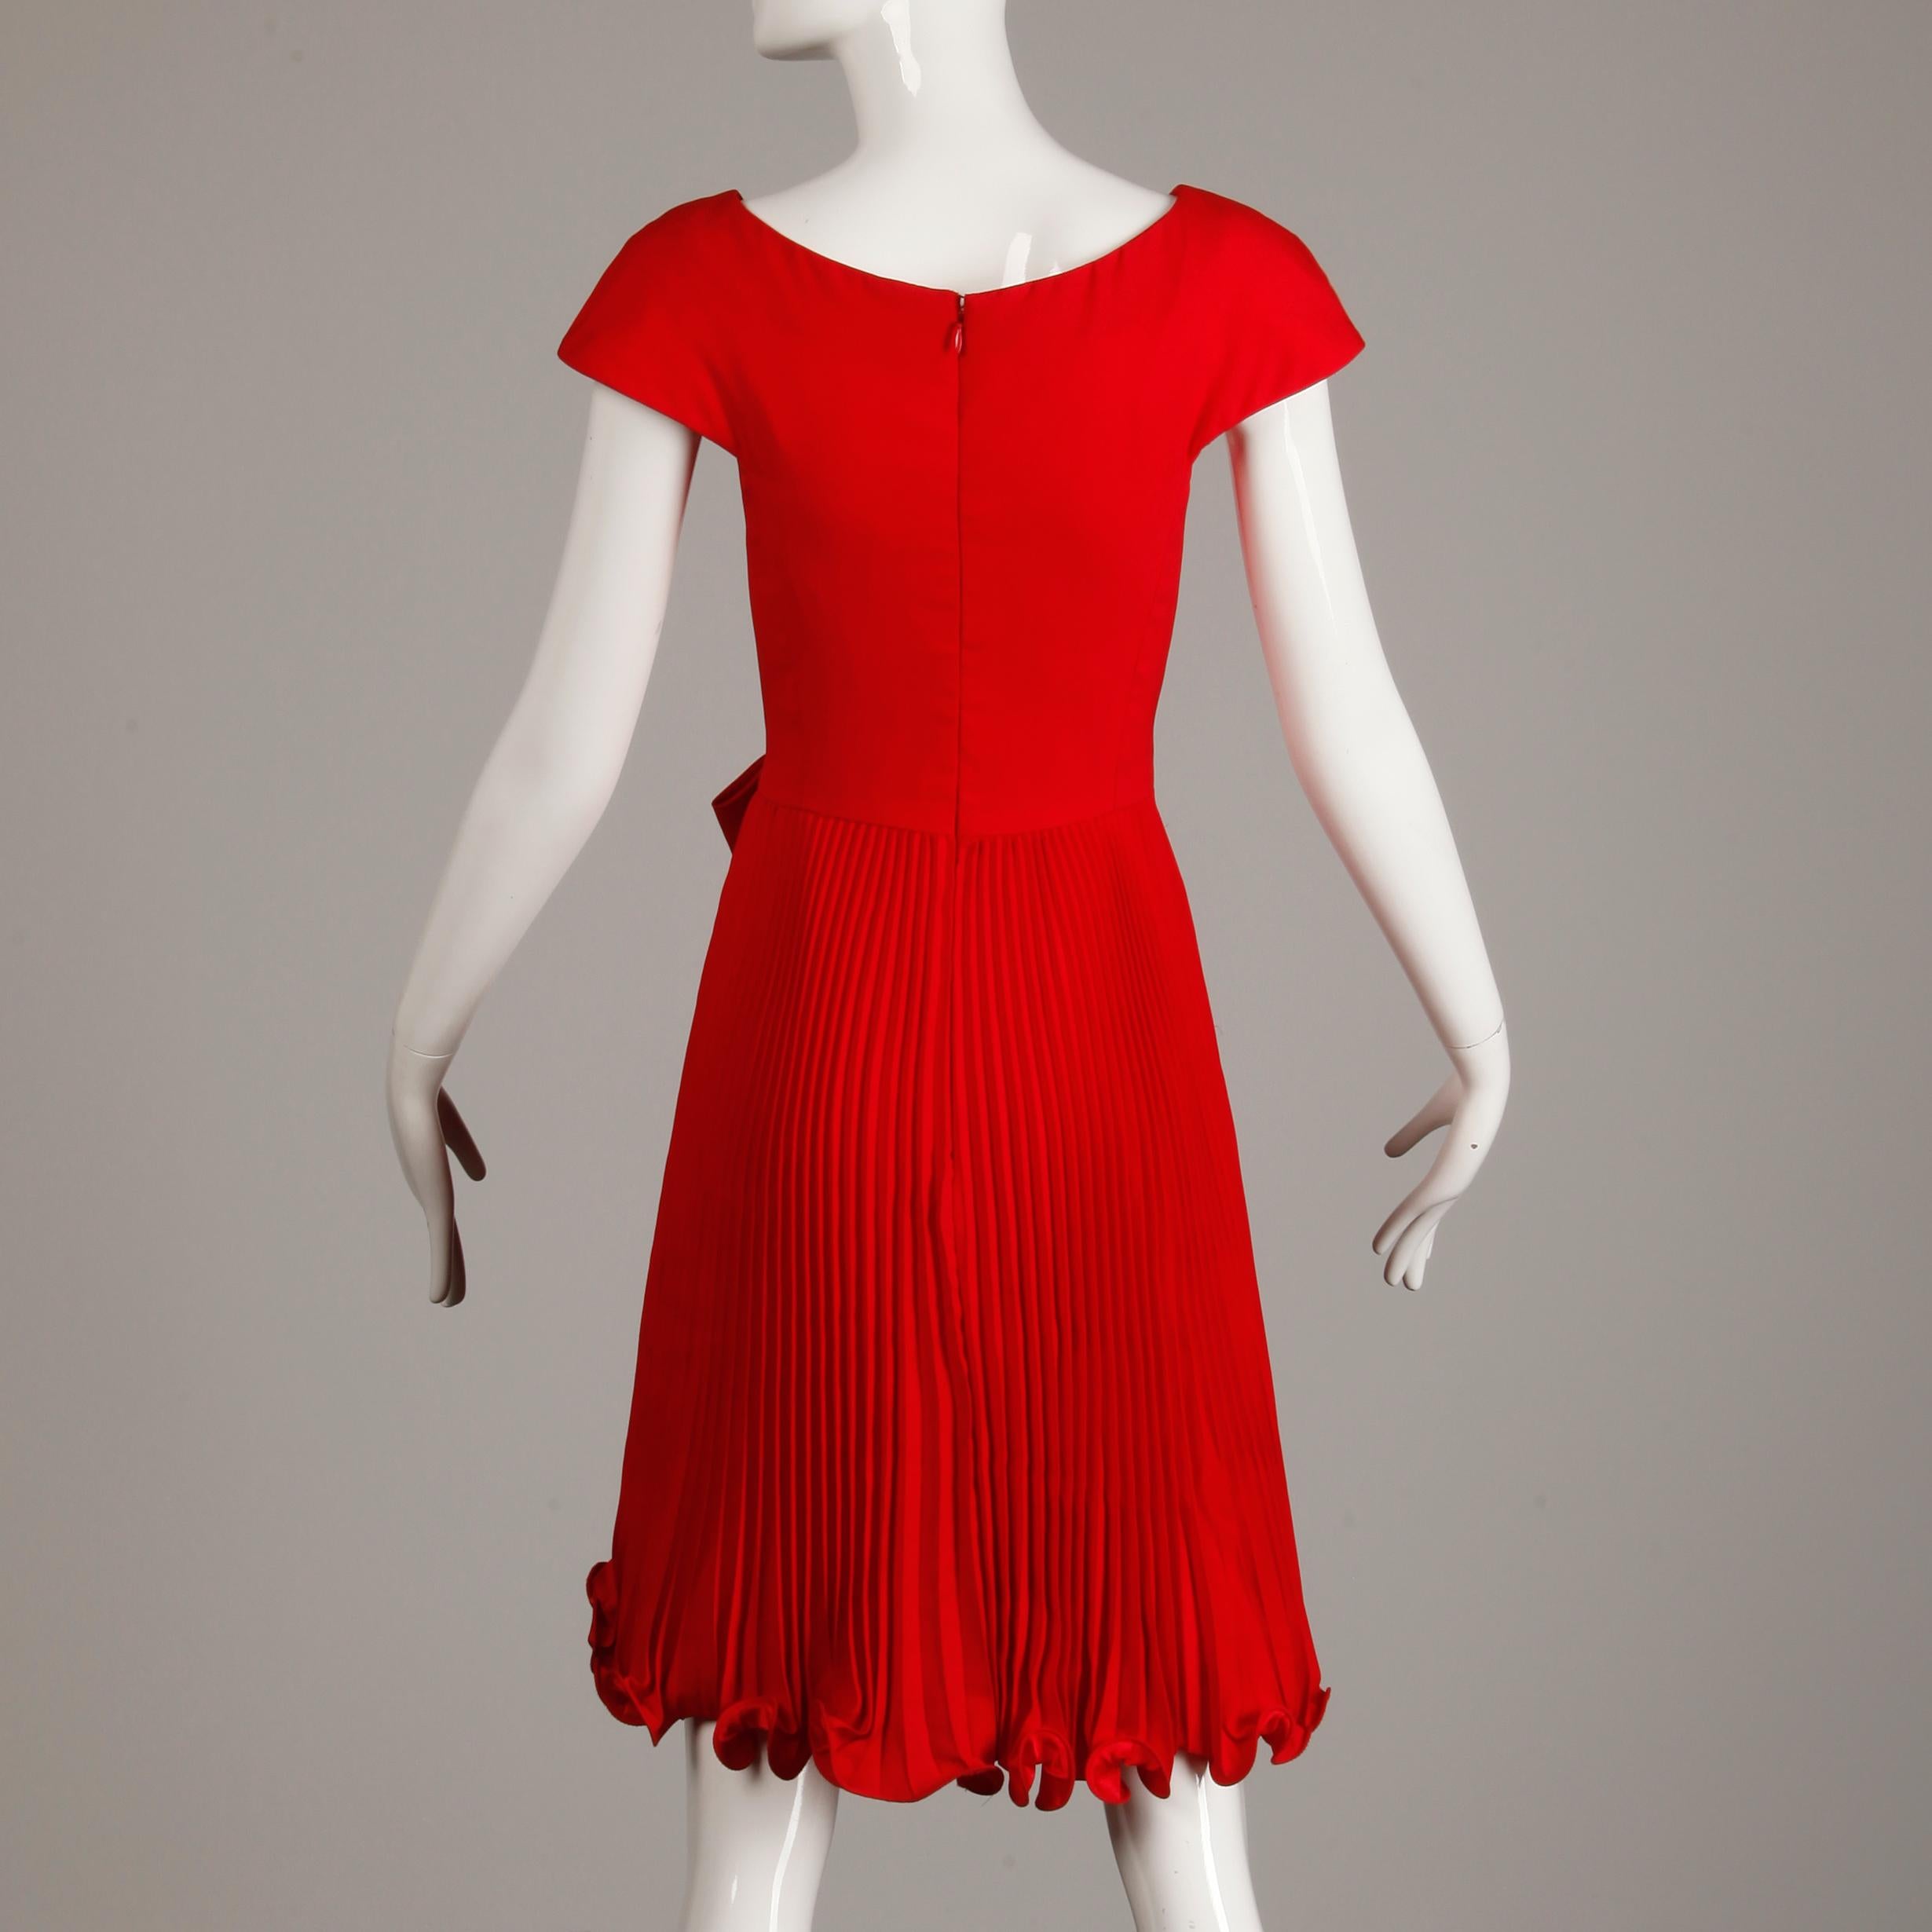 1990s Arnold Scaasi Vintage Red Accordian Pleated Cocktail Dress with Bow Detail 2